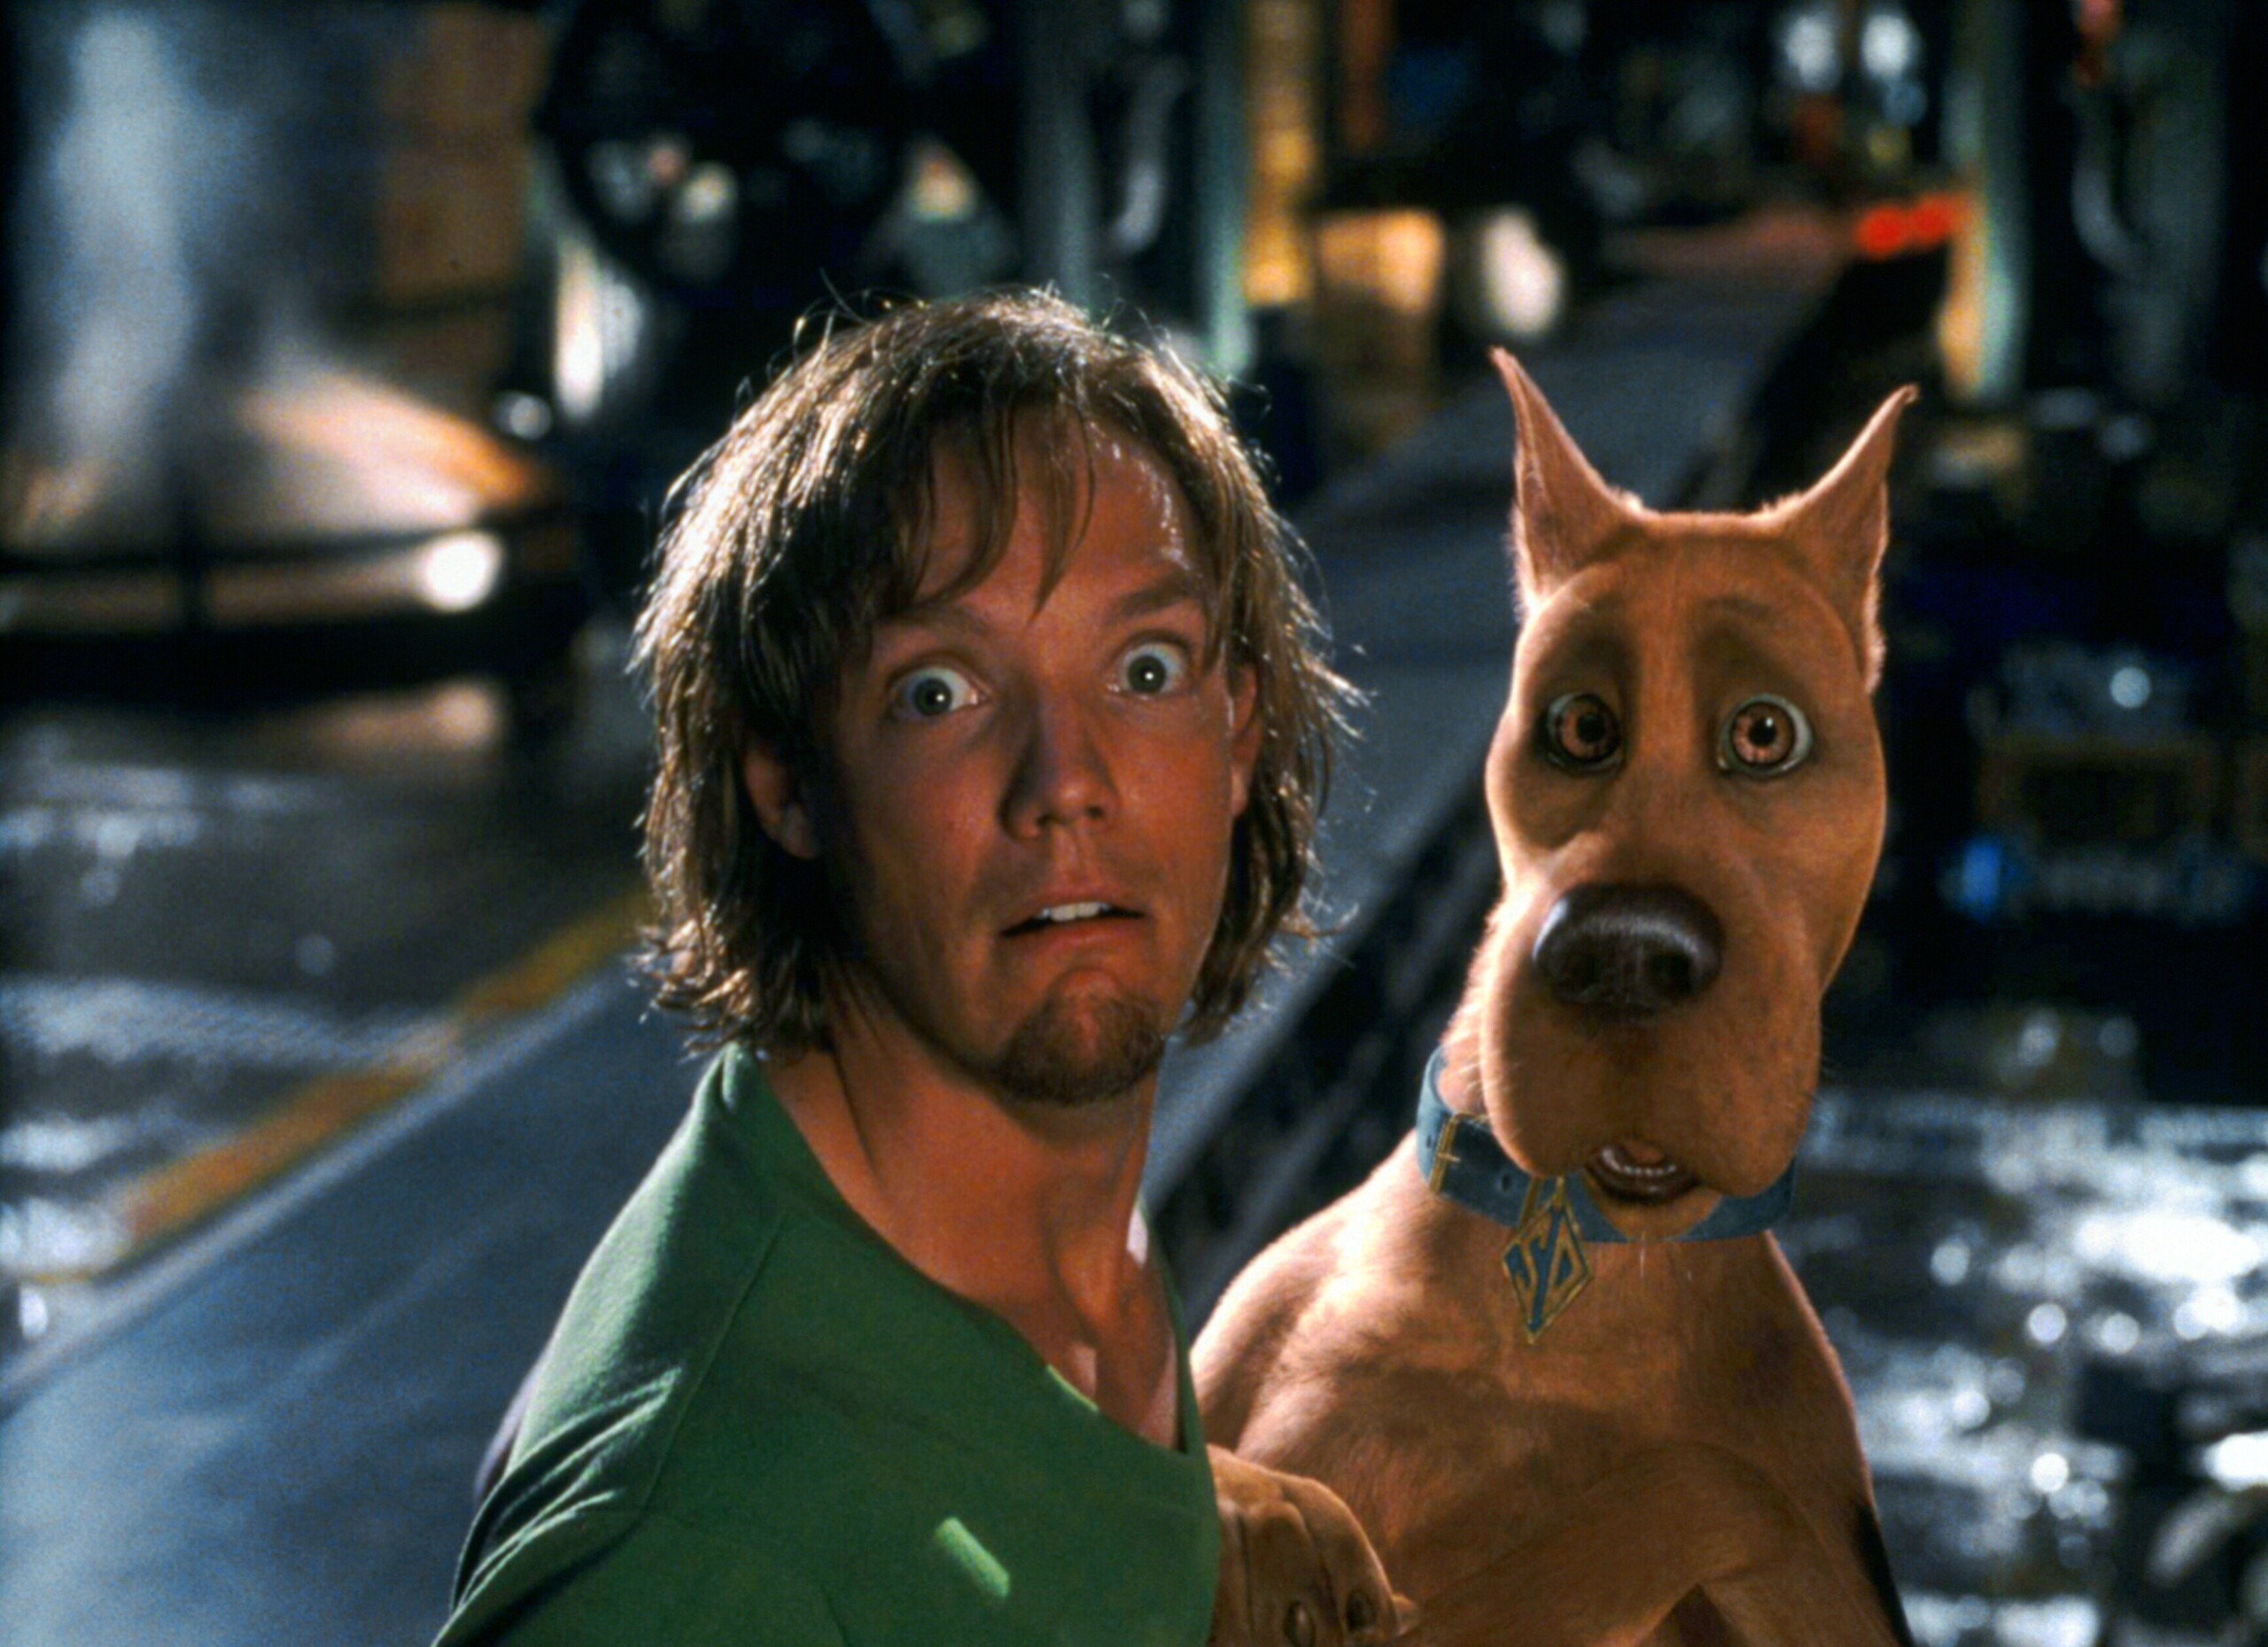 James Gunn claimed that a "Scooby Doo 3" with a R rating would be produced